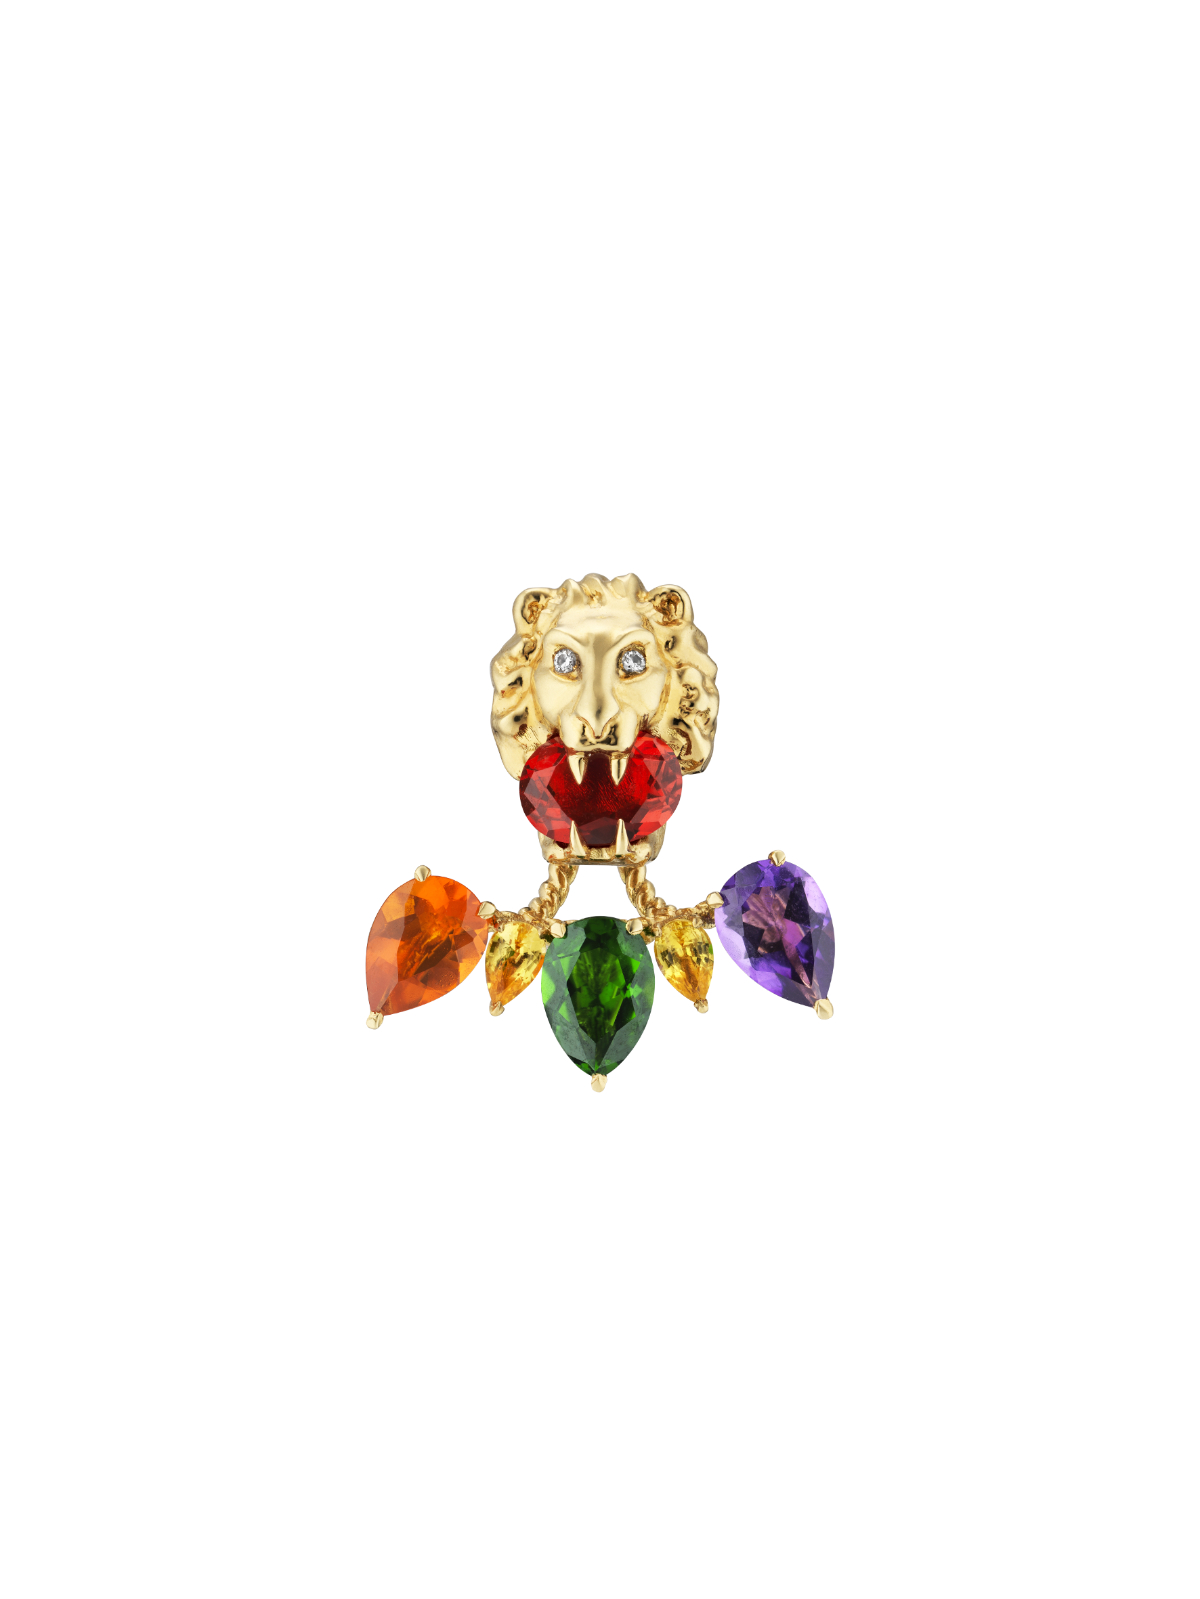 Gucci: New Additions to the Lion Head Fine Jewelry Collection